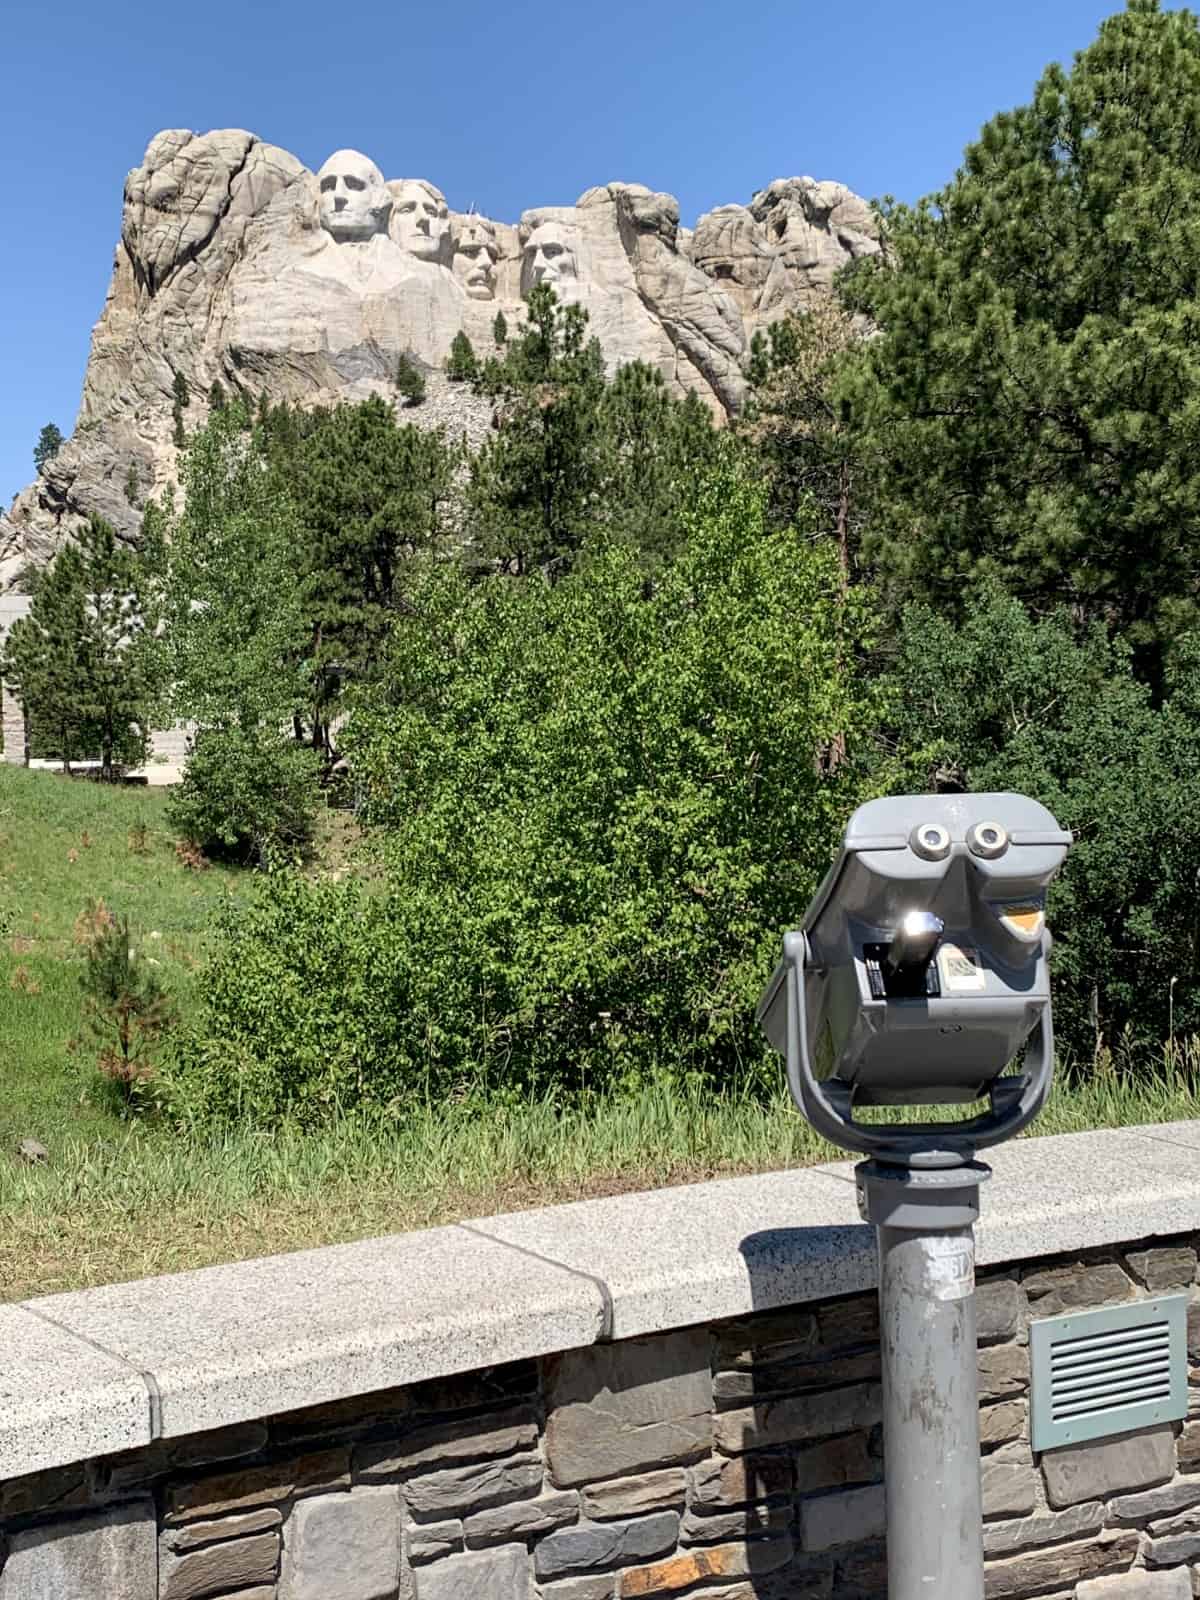 Should Mount Rushmore be on your South Dakota road trip itinerary?